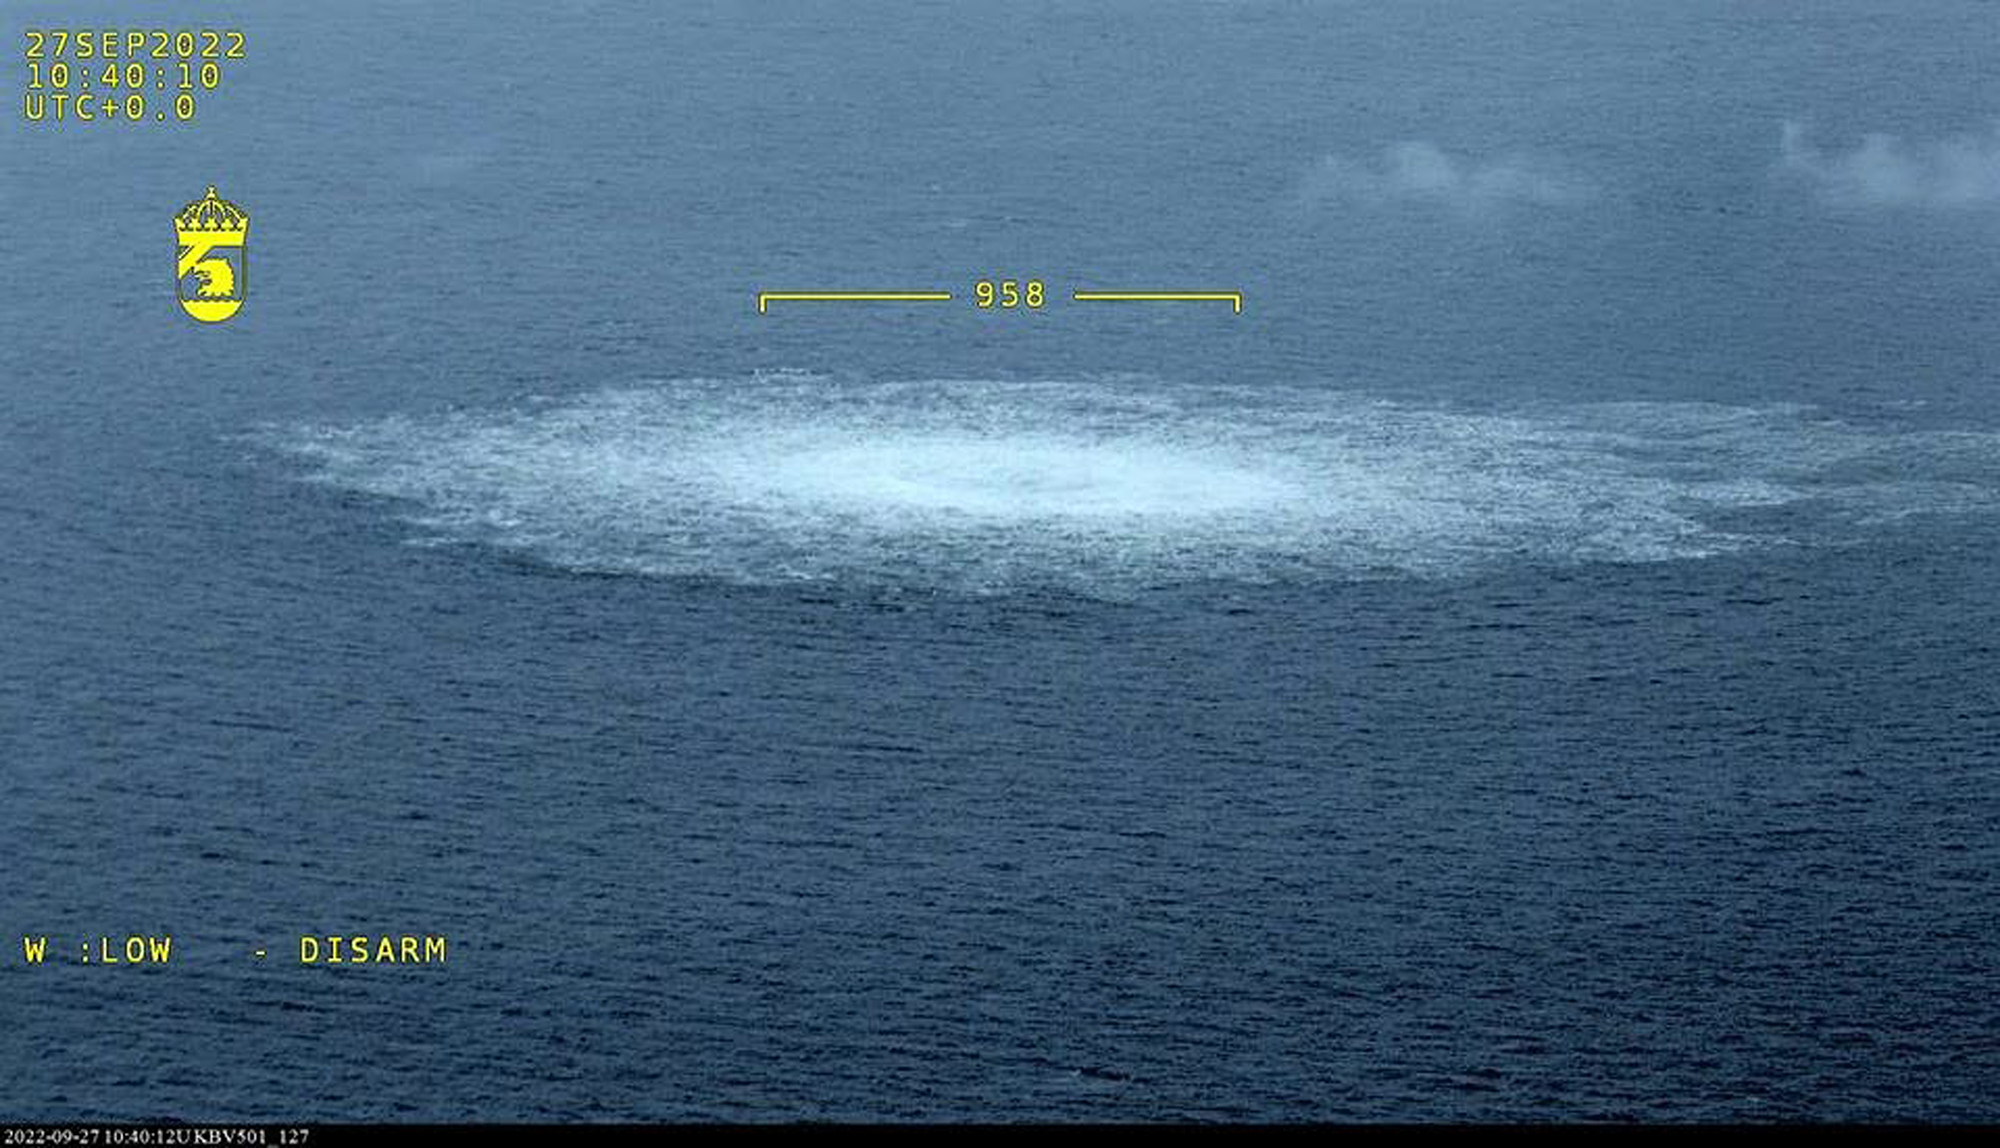 Gas emanating from a leak on the Nord Stream 2 gas pipeline in the Baltic Sea on September 27.